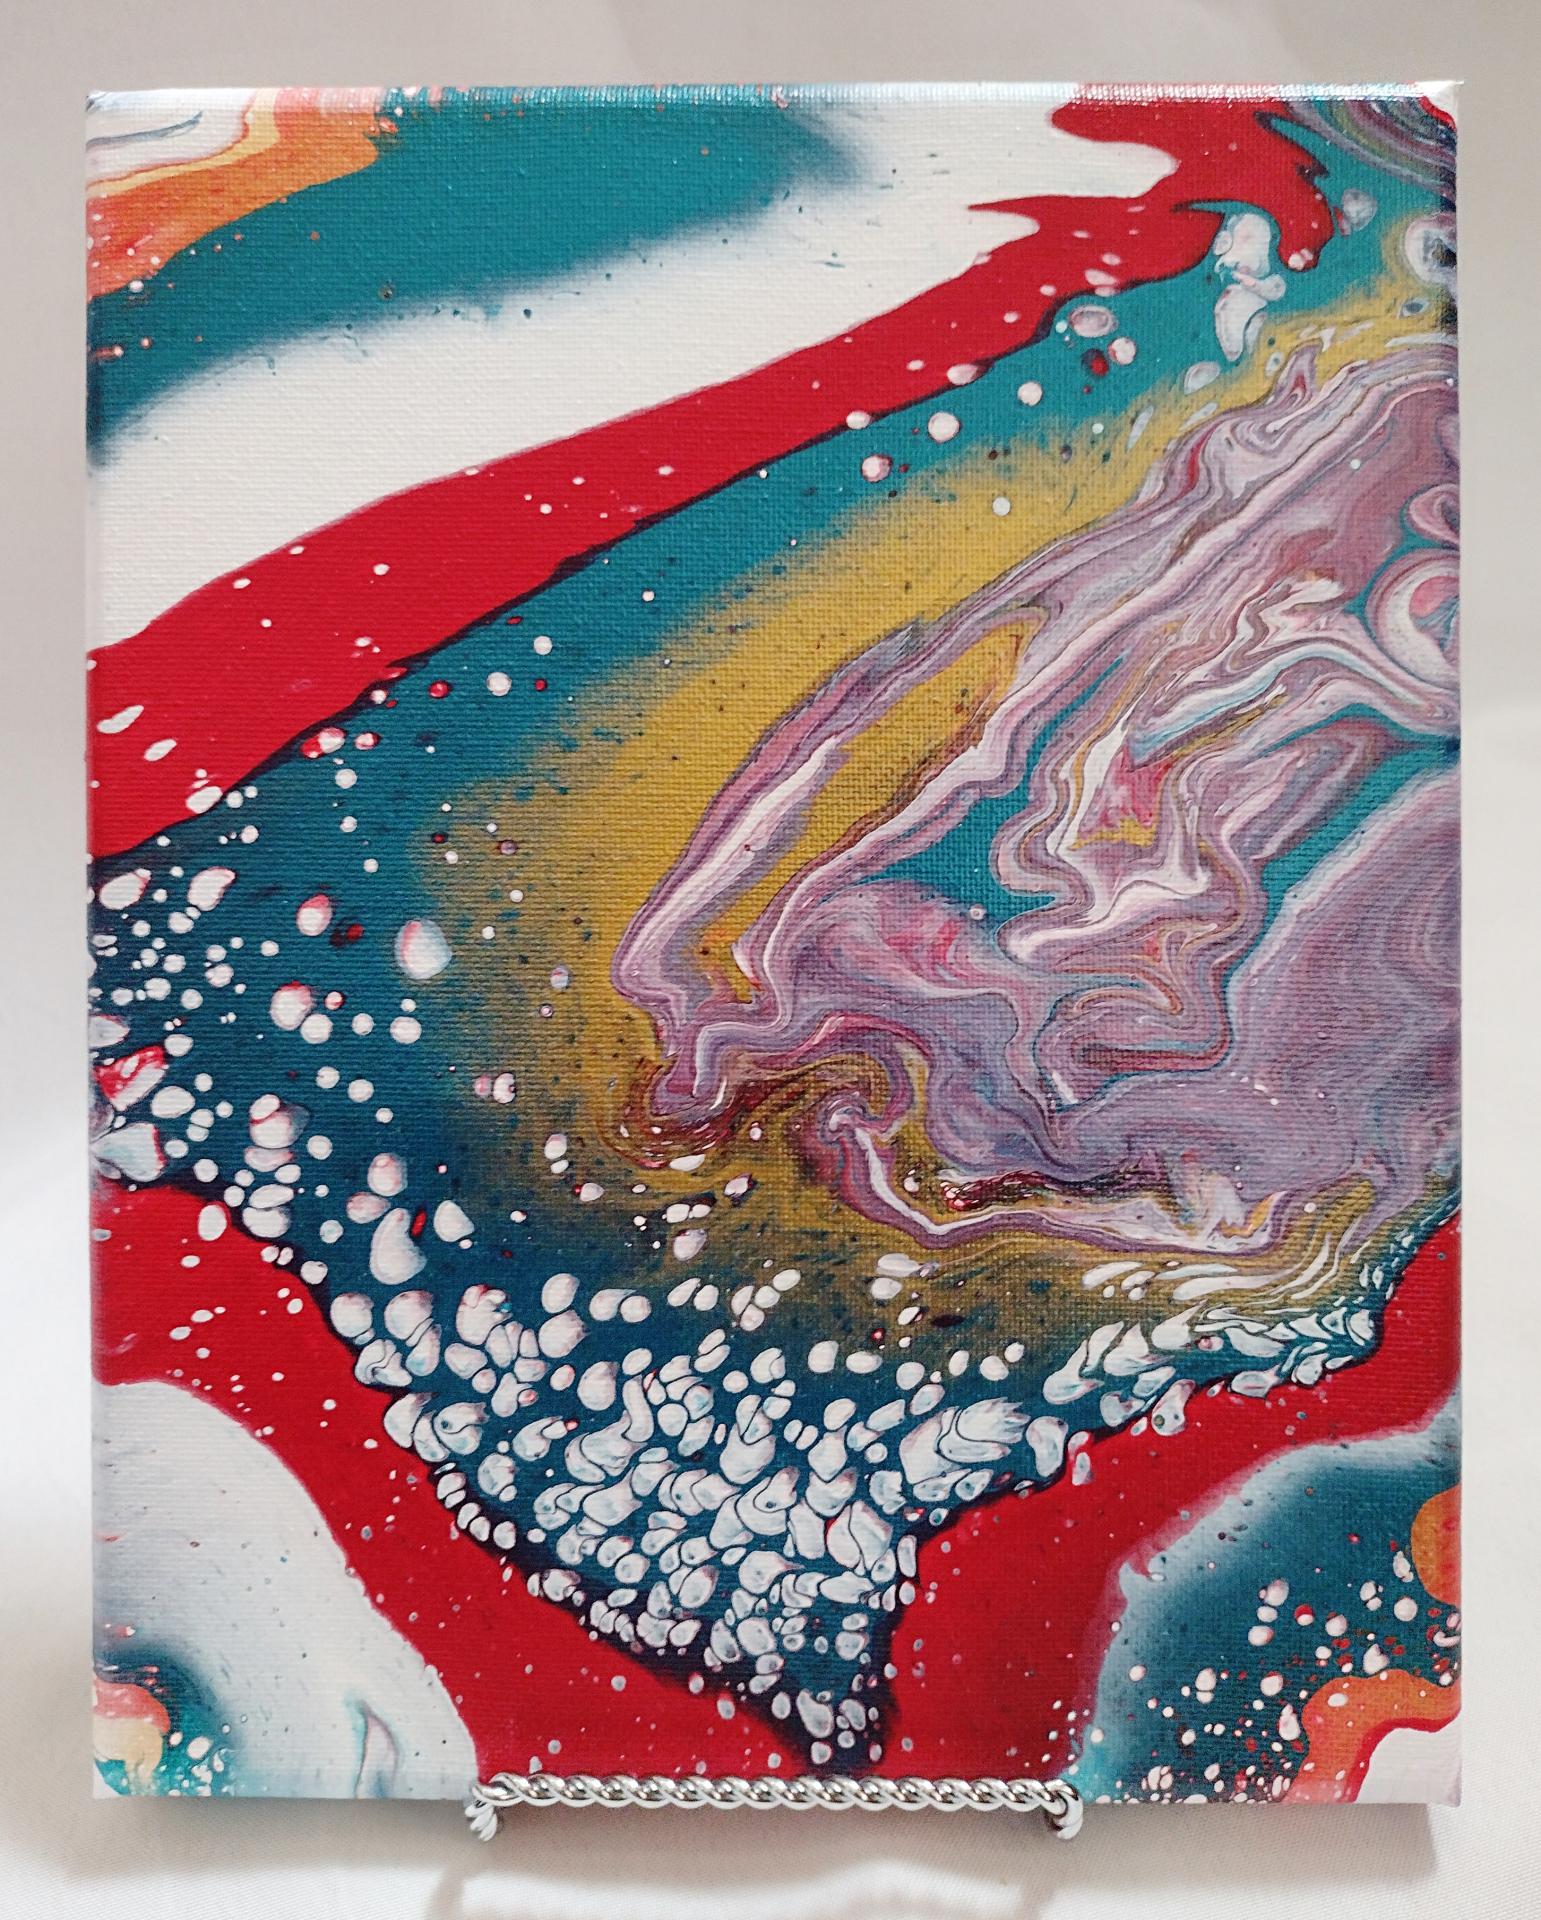 Red, Blue, Gold, and Purple Abstract Original Acrylic Pour Painting, 8" x 10", Fluid Art Painting